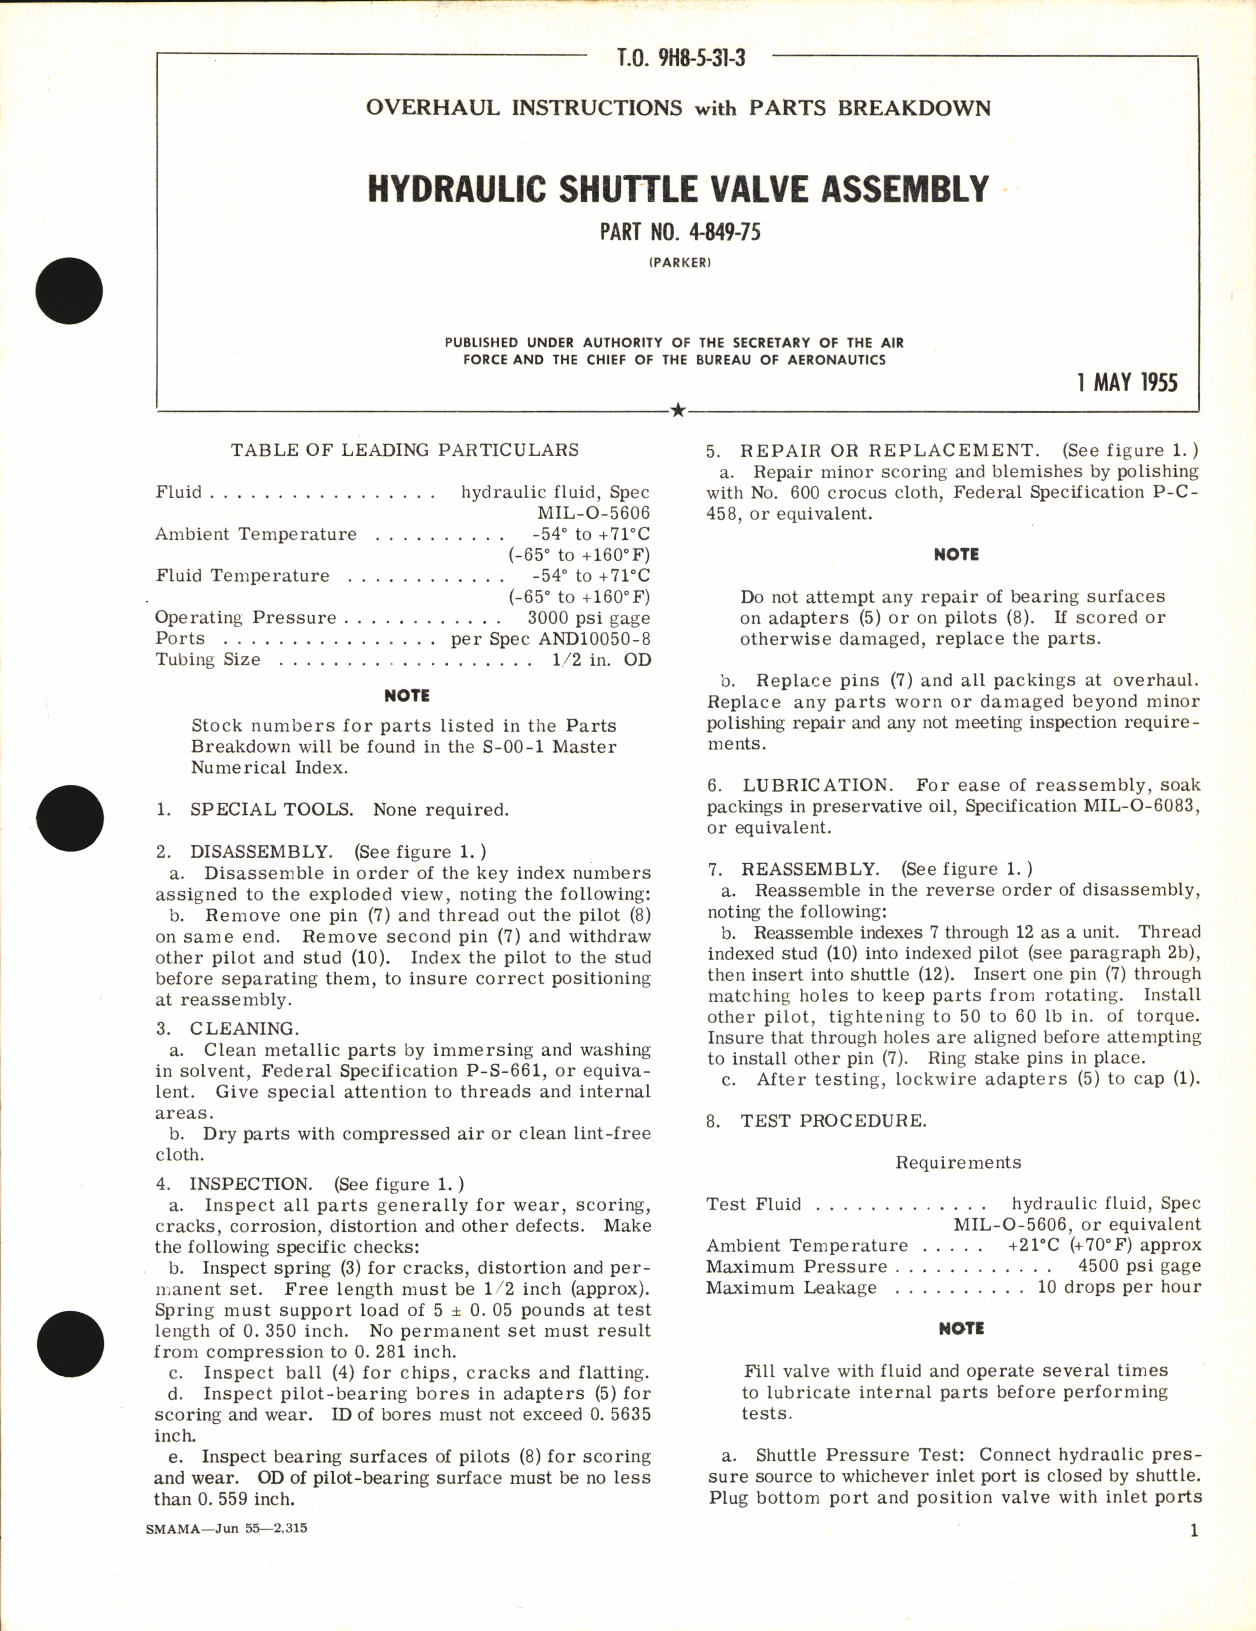 Sample page 1 from AirCorps Library document: Overhaul Instructions with Parts Breakdown for Hydraulic Shuttle Valve Assembly Part No. 4-849-75